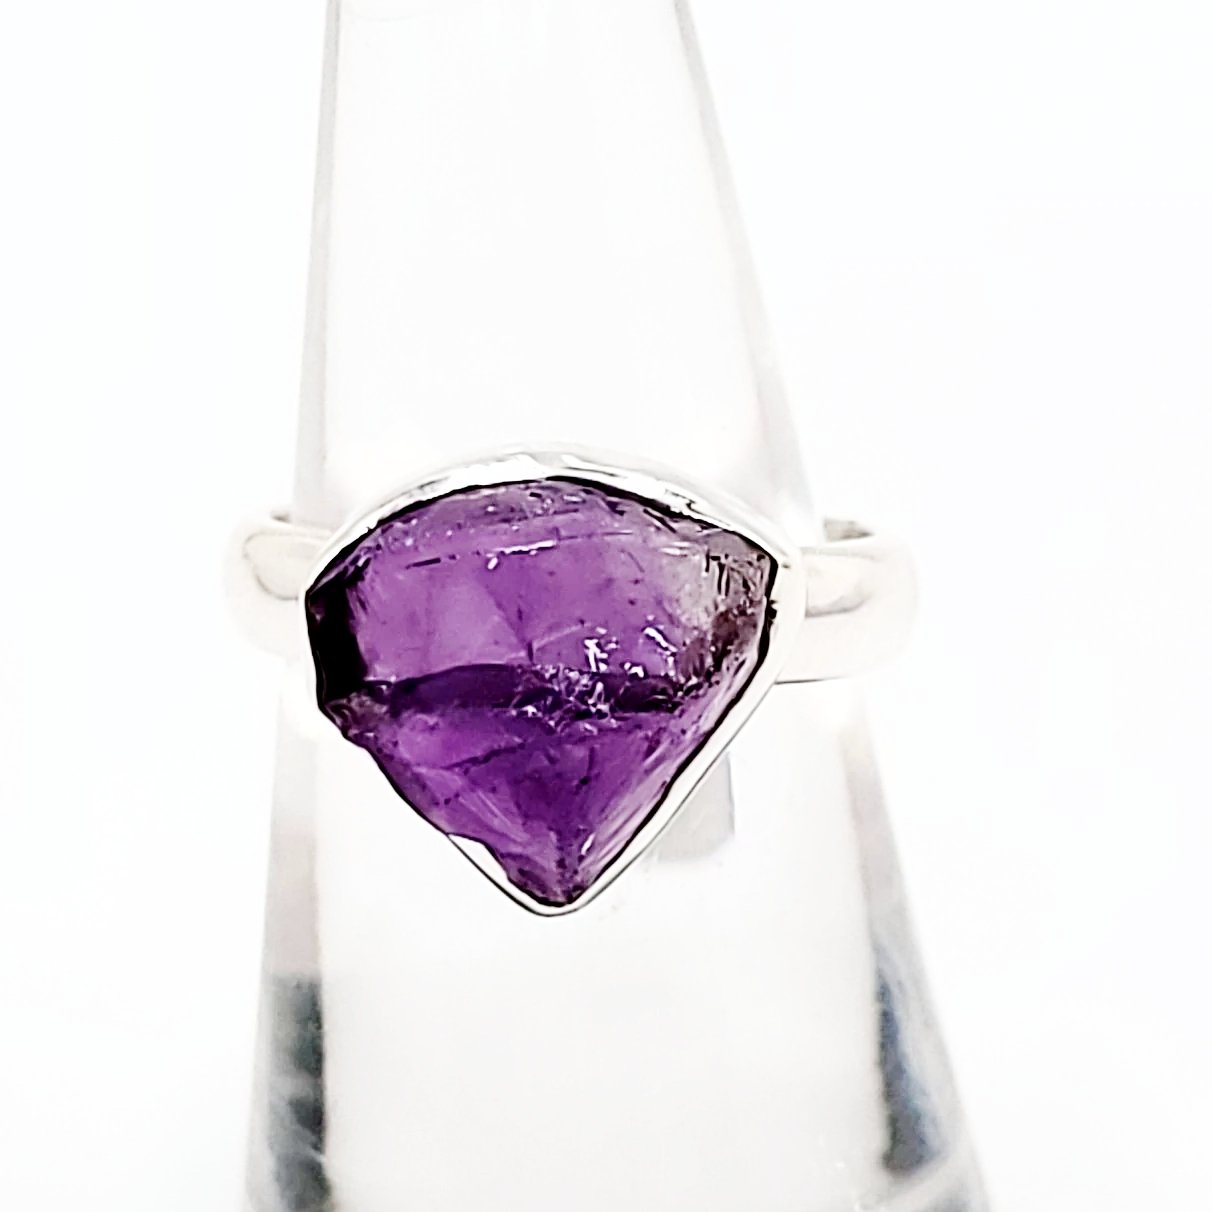 Amethyst Ring Sterling Silver Rough Stone Trillion Cut - Elevated Metaphysical